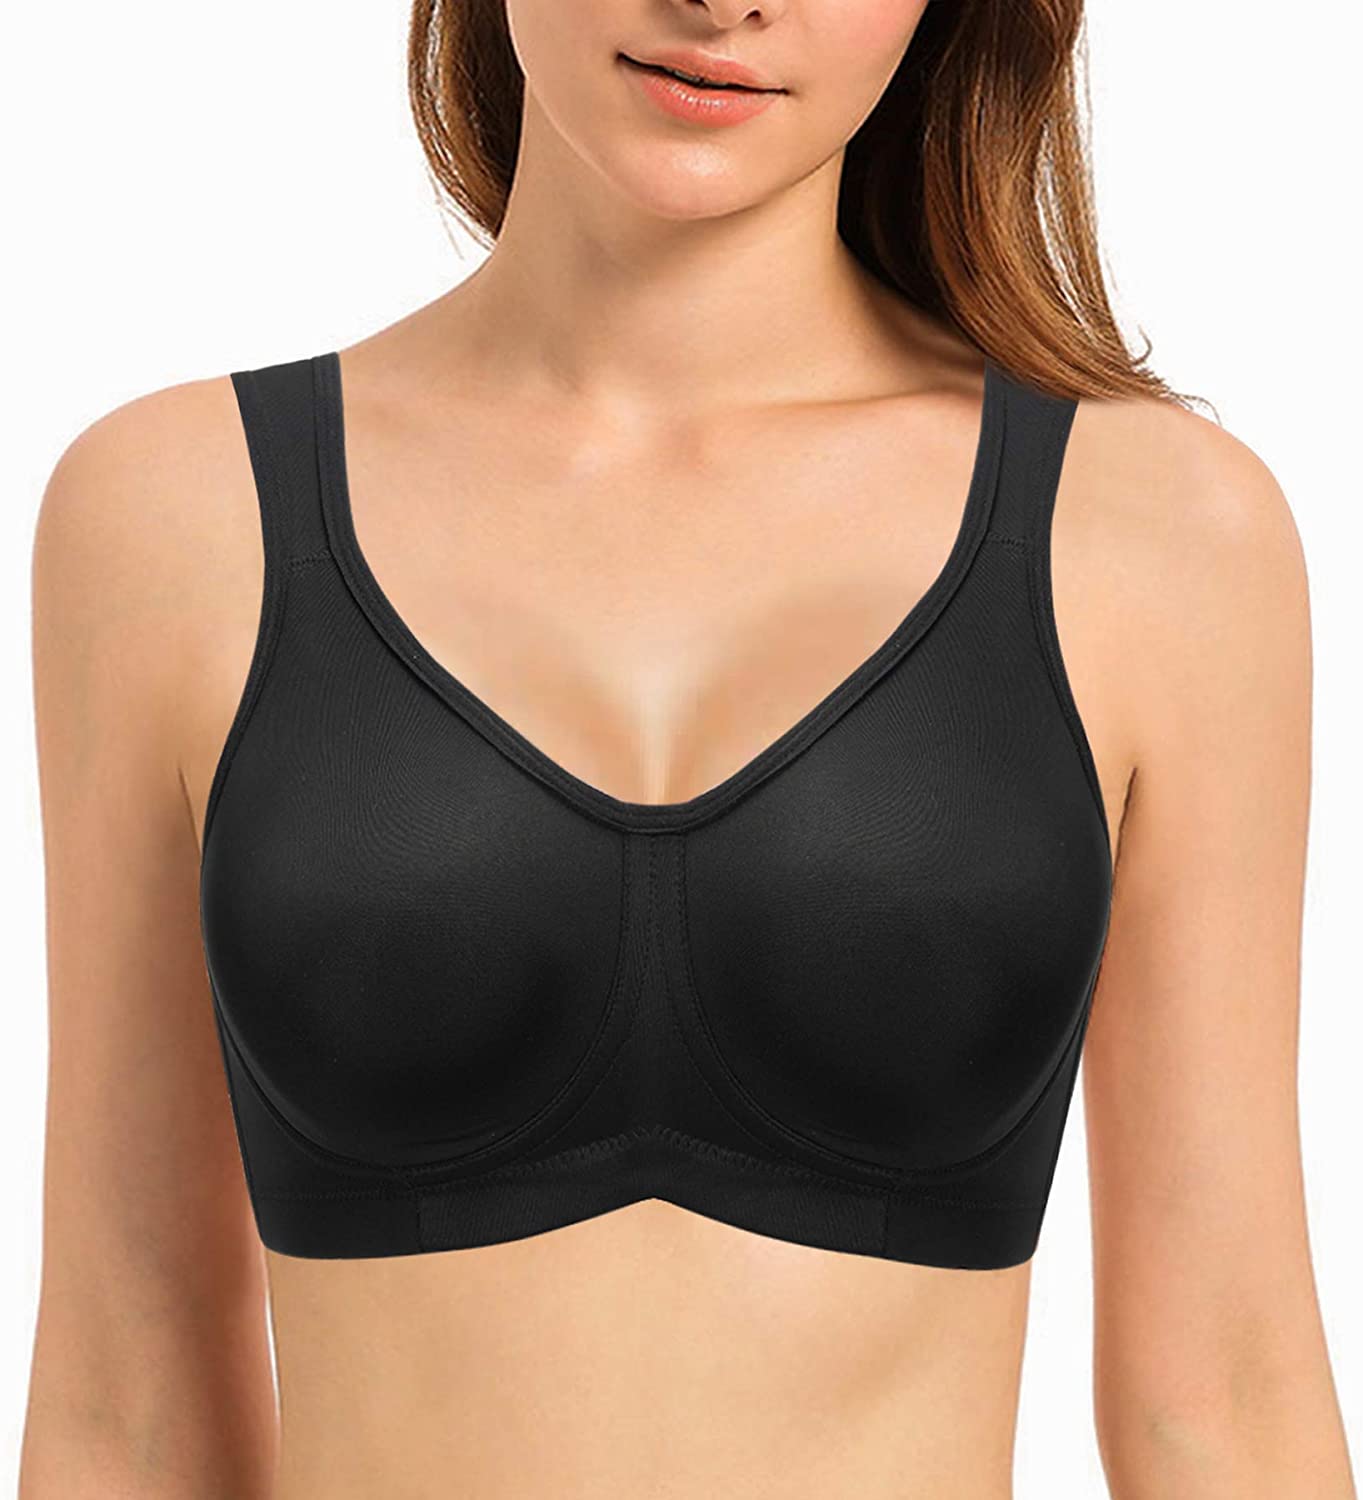 Price:$14.99 Rolewpy Smoothing Wireless Bra Full Coverage Women Bralette Minimizer No Underwire No Padding Sleep Bra Lingerie top at Amazon Women’s Clothing store